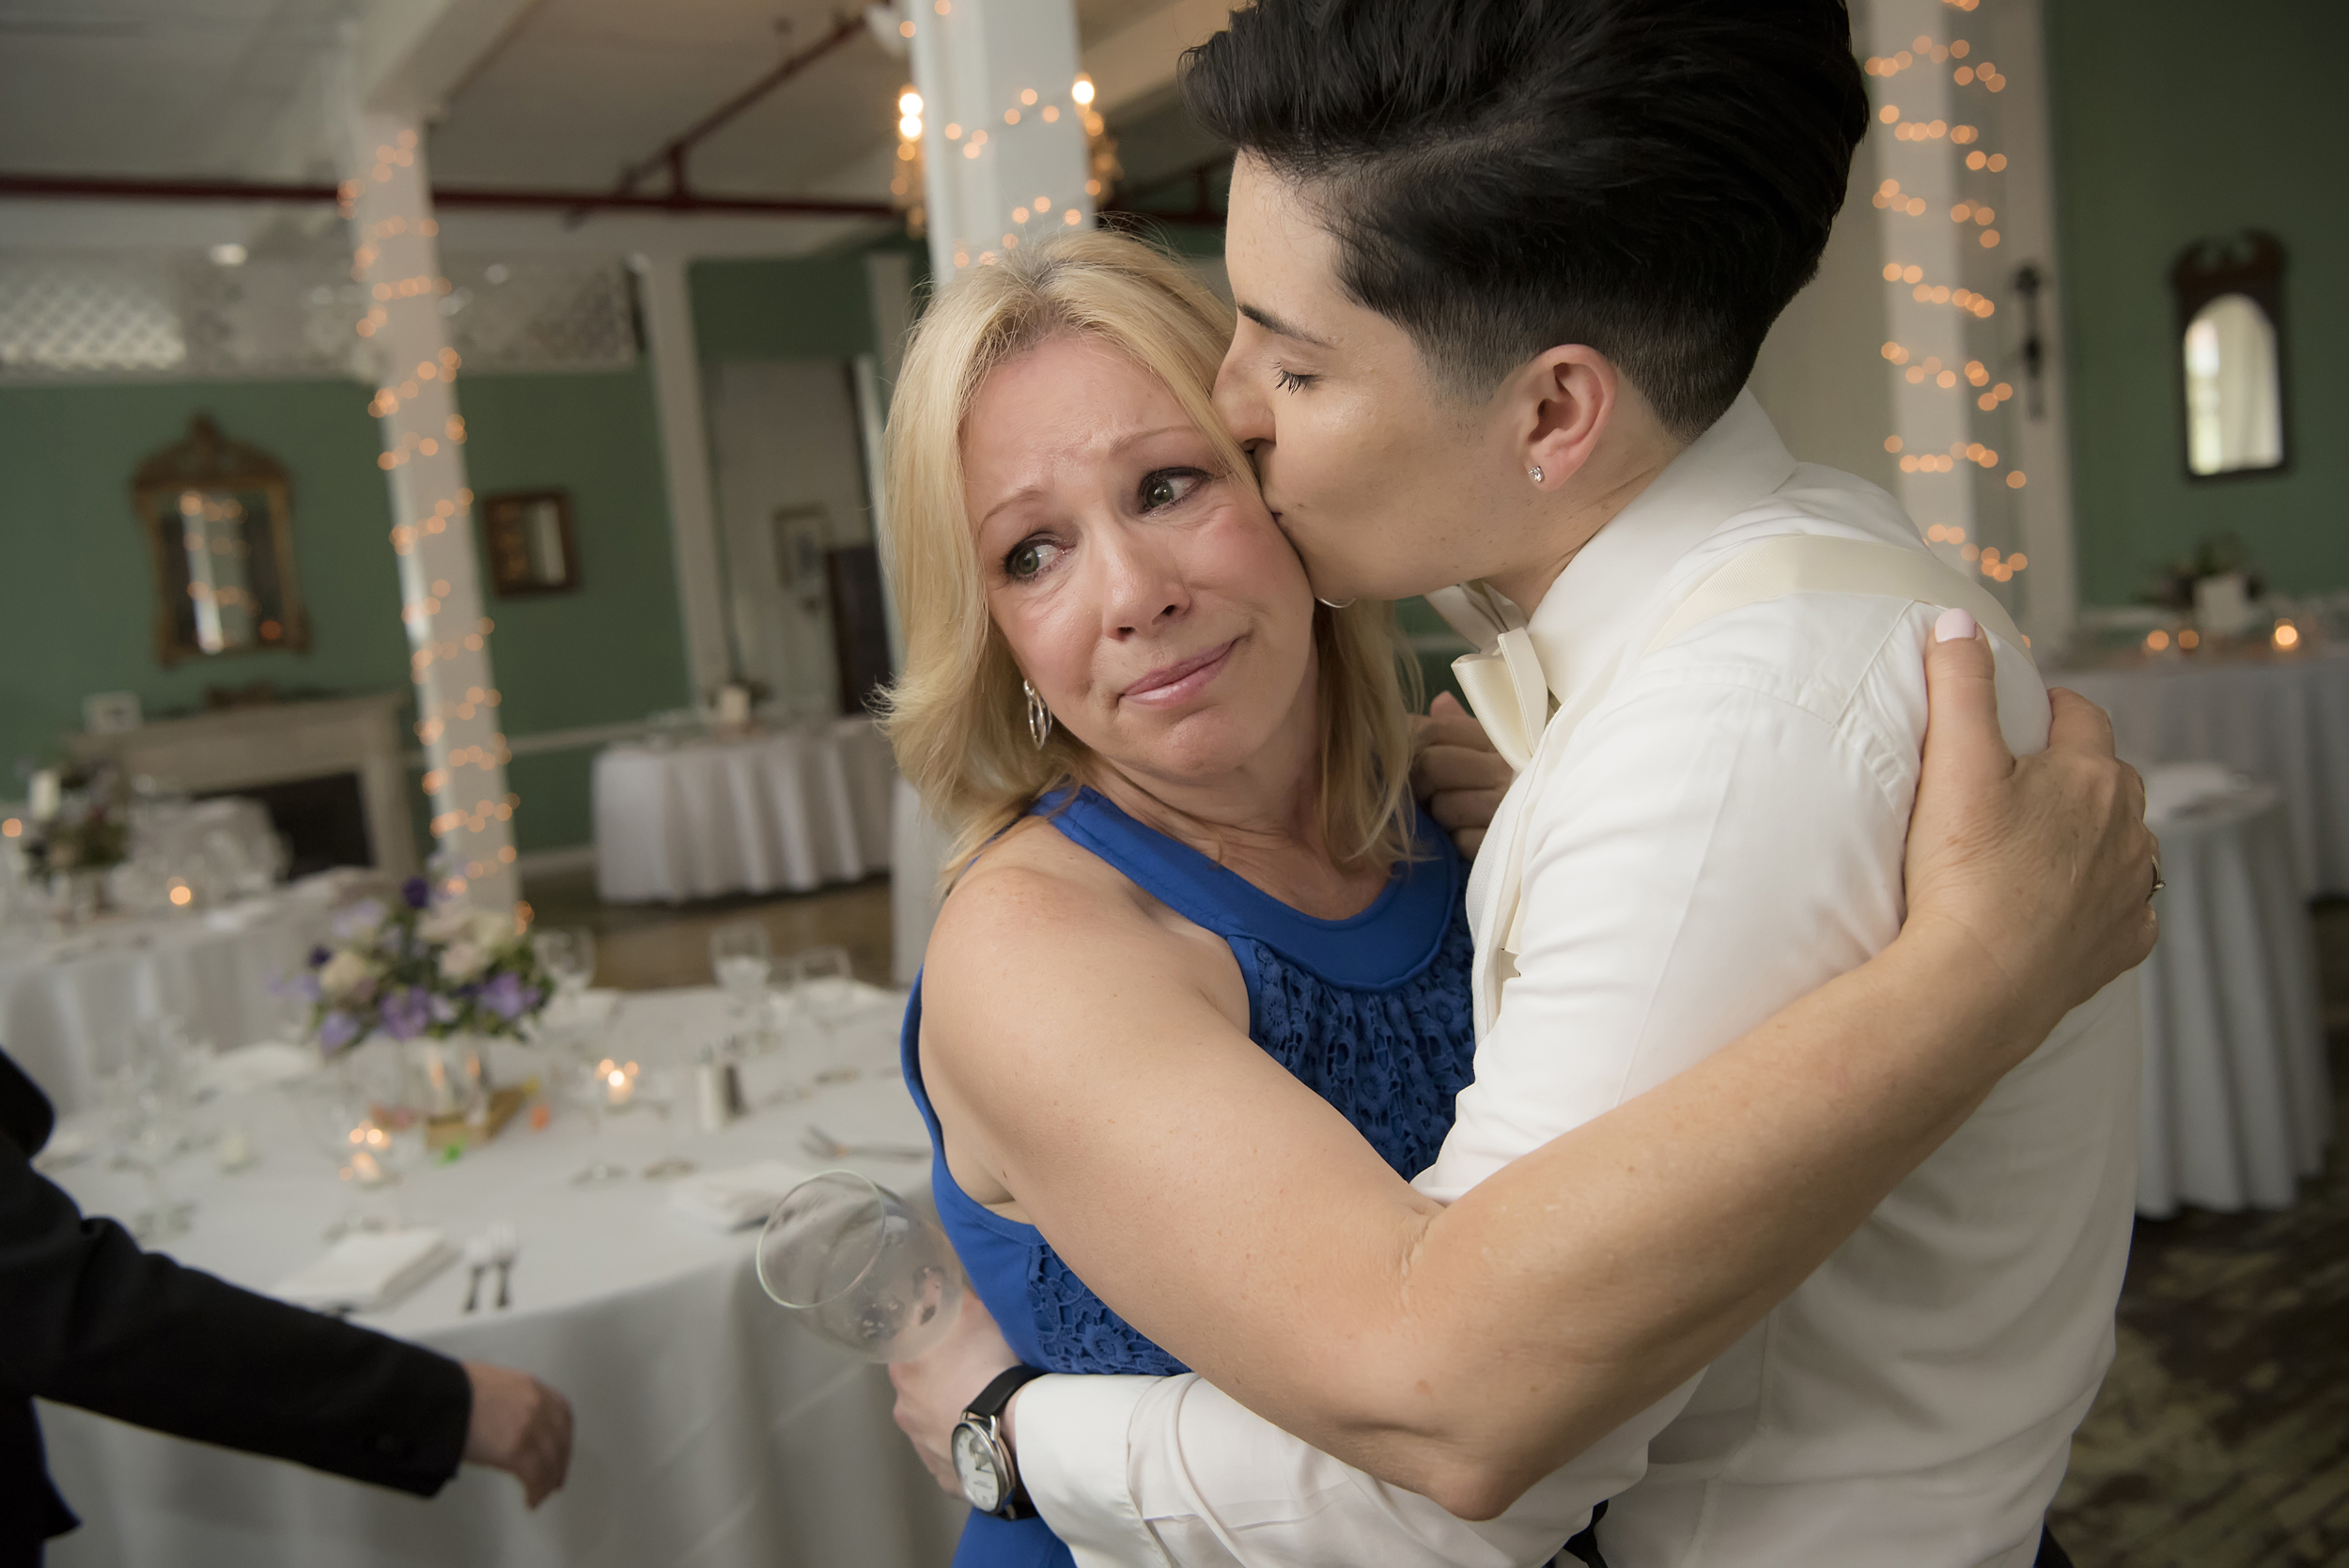 Women tearfully hugs bride with short dark hair wearing a tuxedo shirt, as they stand in an empty reception hall in a photo by Studio A Images